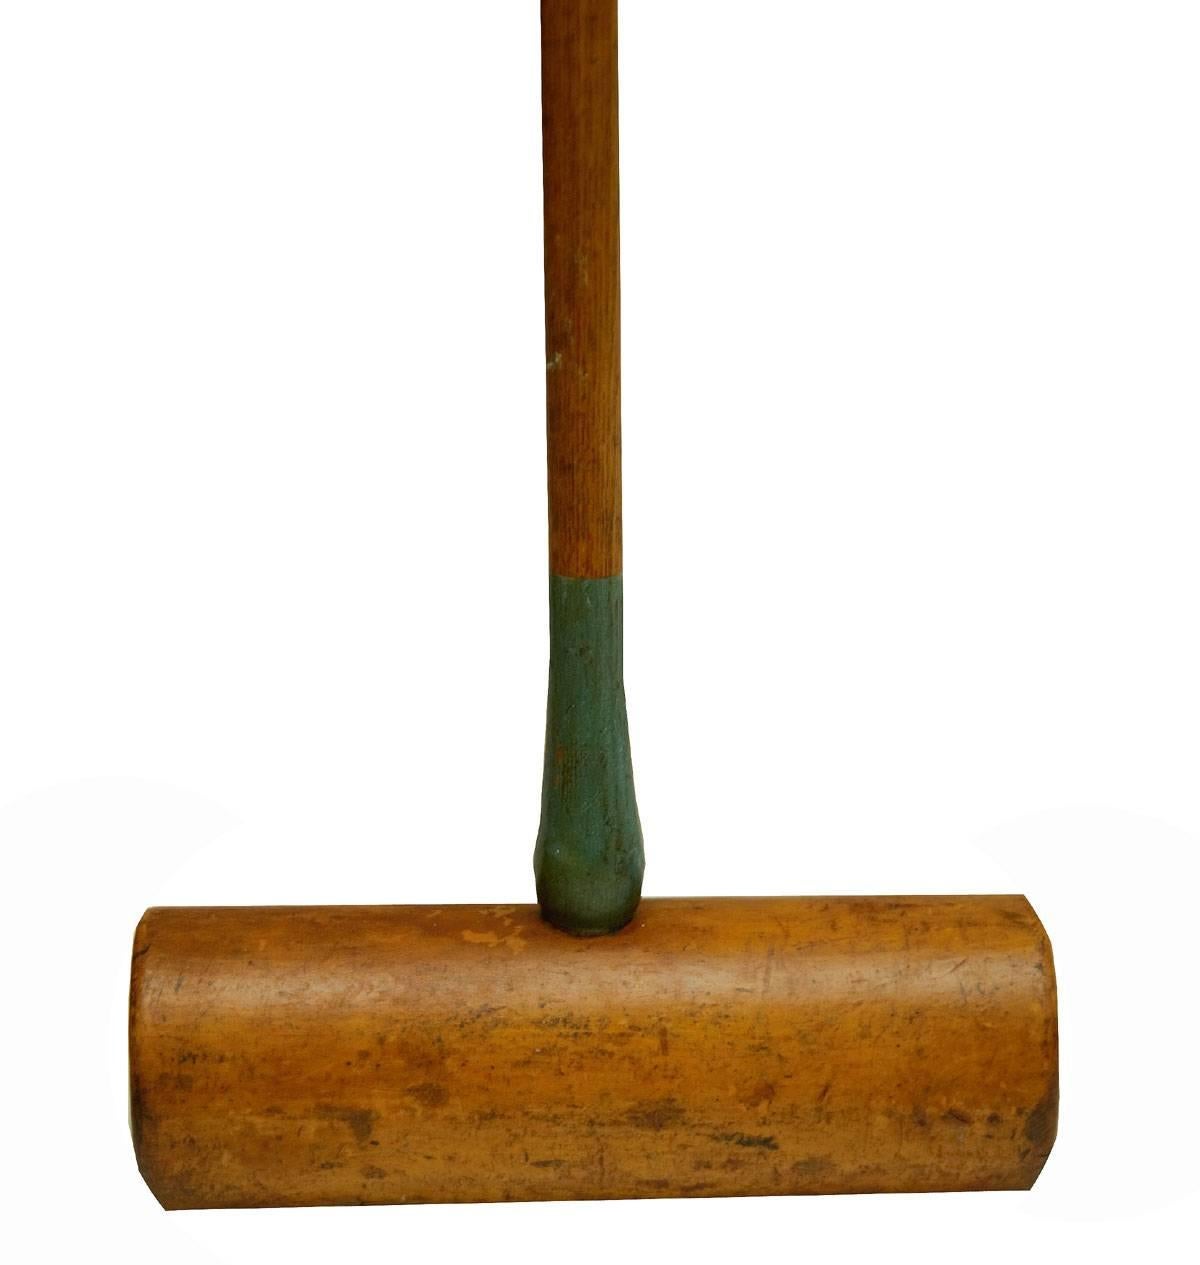 These are original croquet mallets from the turn of the century. They have beautiful patina and are all in fine shape. The colors are noted on the ends closest to the head of the mallet. They are Maple heads  and Hickory shafts. Wonderful decor